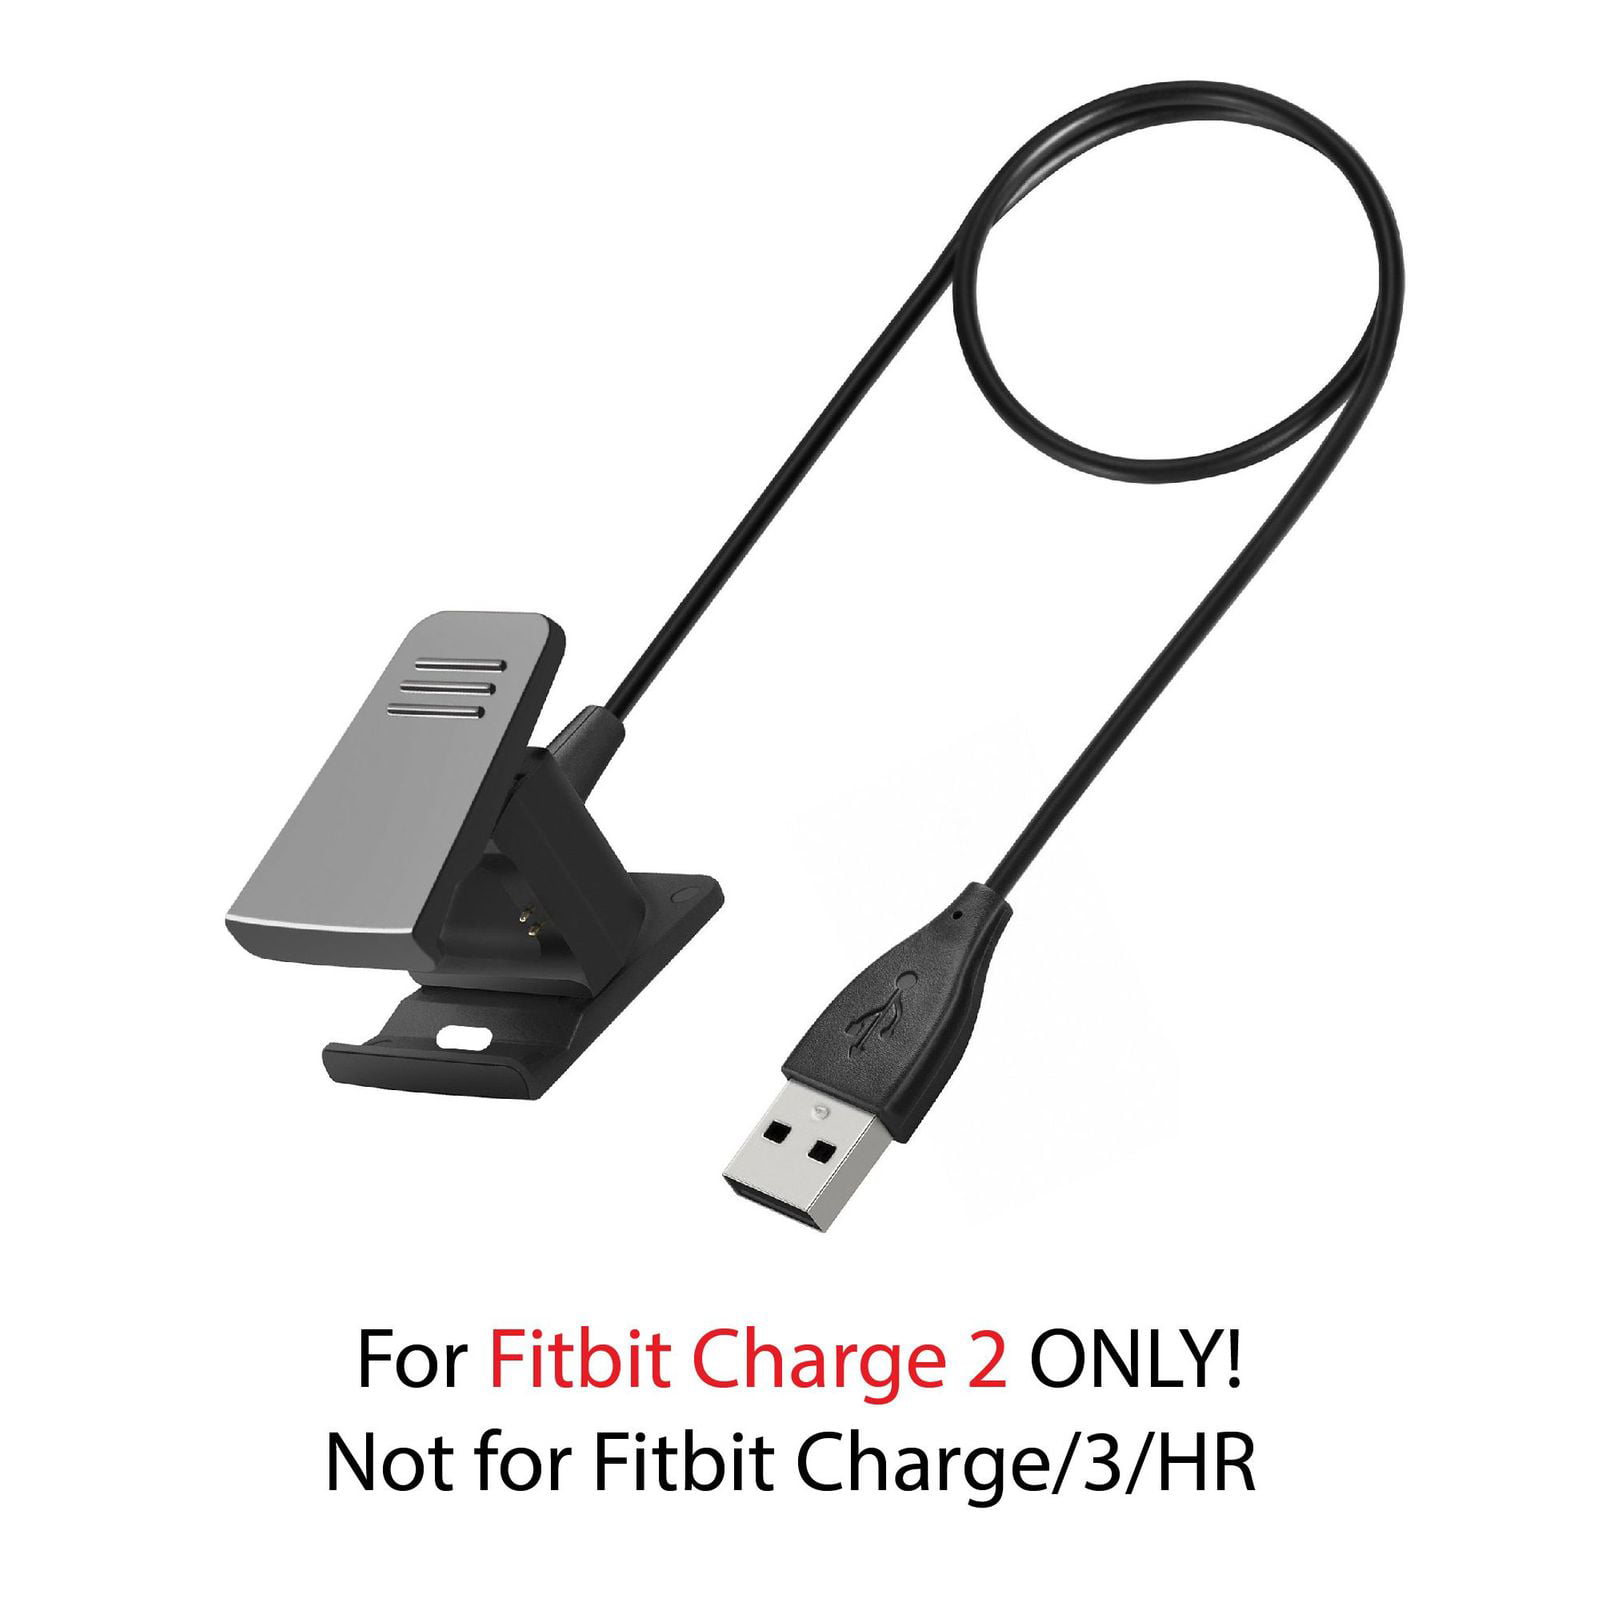 USB Charging Cable Charger Lead for Fitbit CHARGE HR Fitness Tracker Wristband 